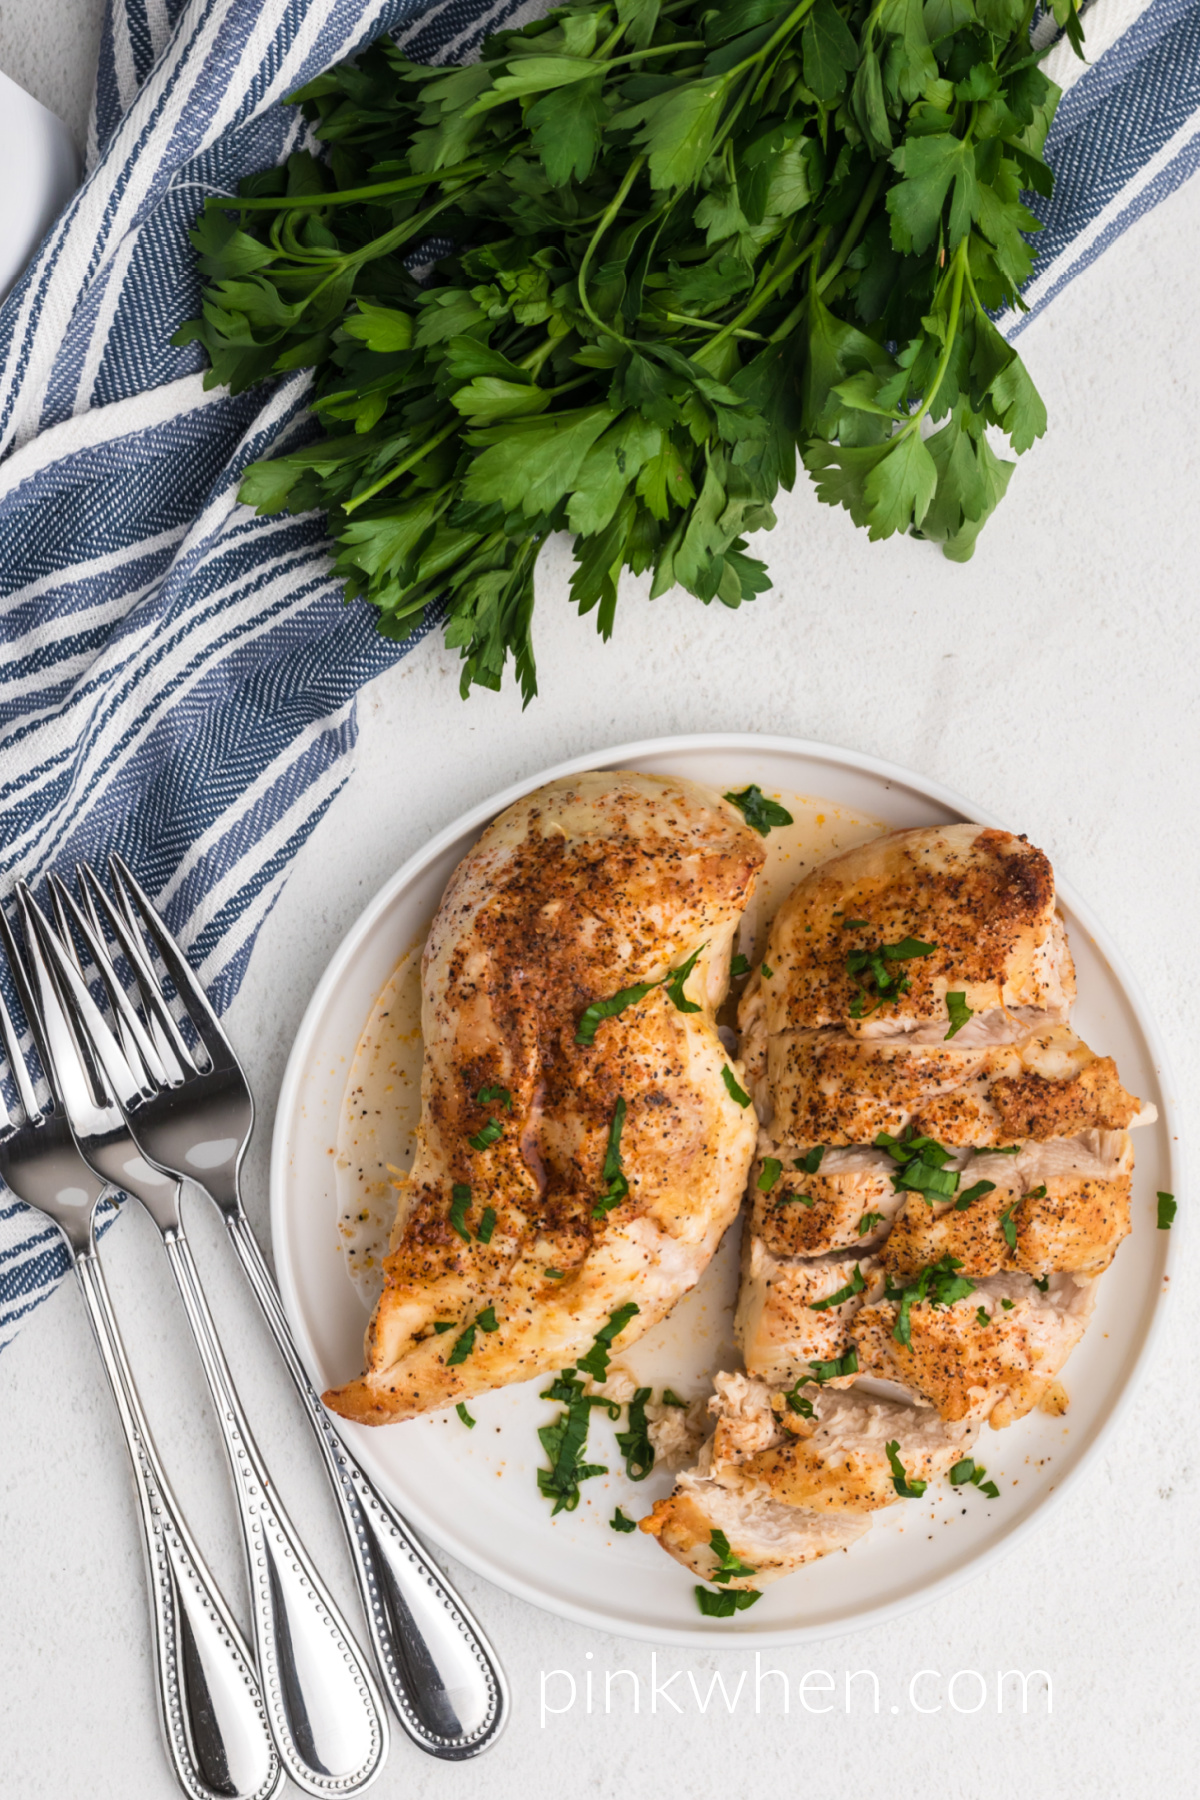 air fryer chicken breast made from frozen, fully cooked and seasoned and served on a white plate.